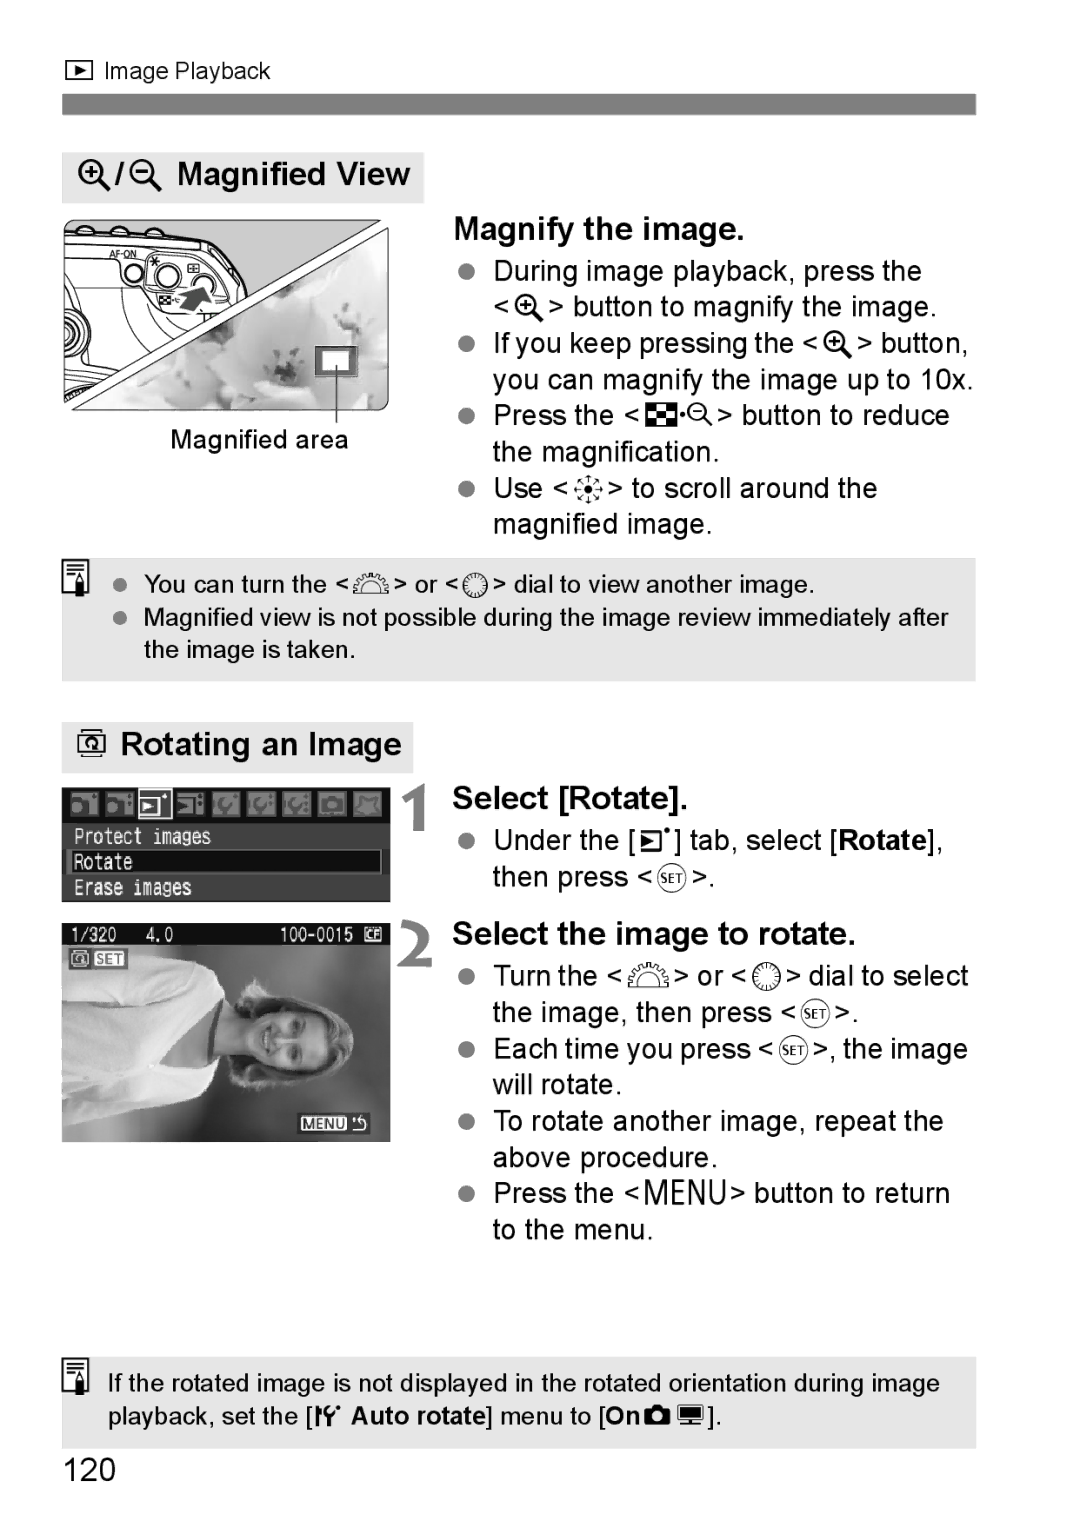 Canon EOS40D YMagnified View, Magnify the image, BRotating an Image Select Rotate, Select the image to rotate, 120 